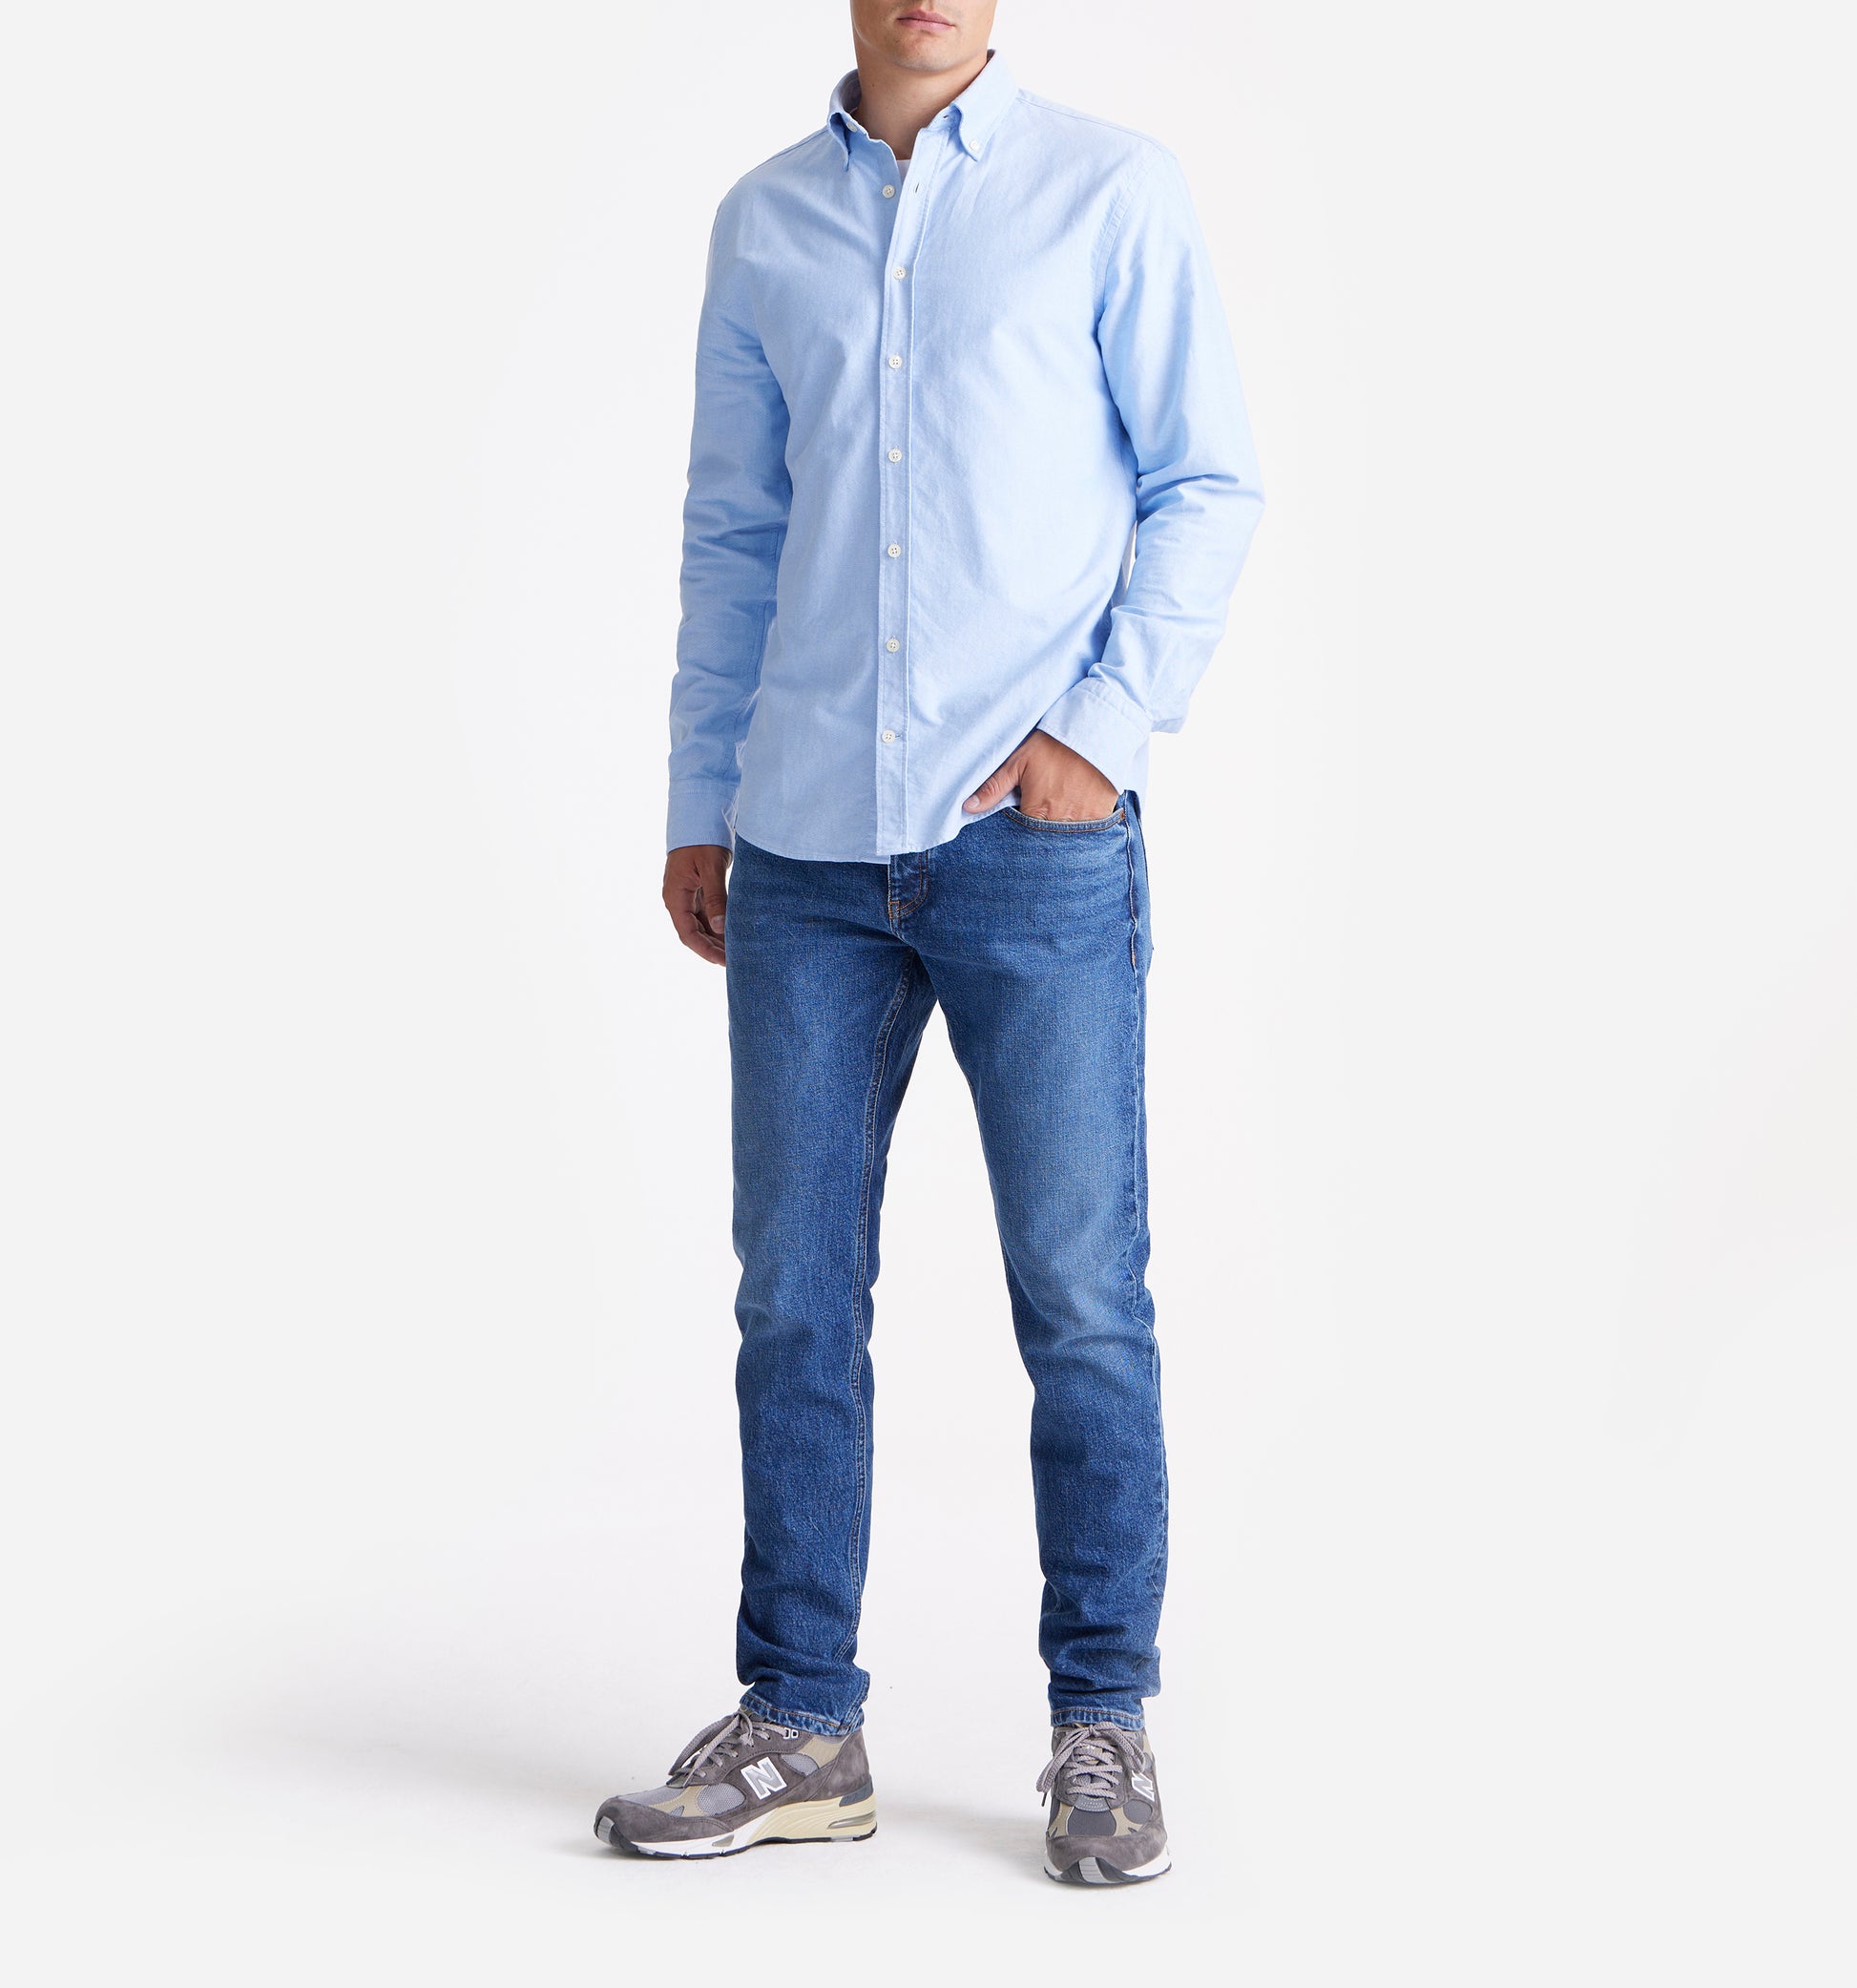 The Men's Oxford Shirt with Magic Fit®